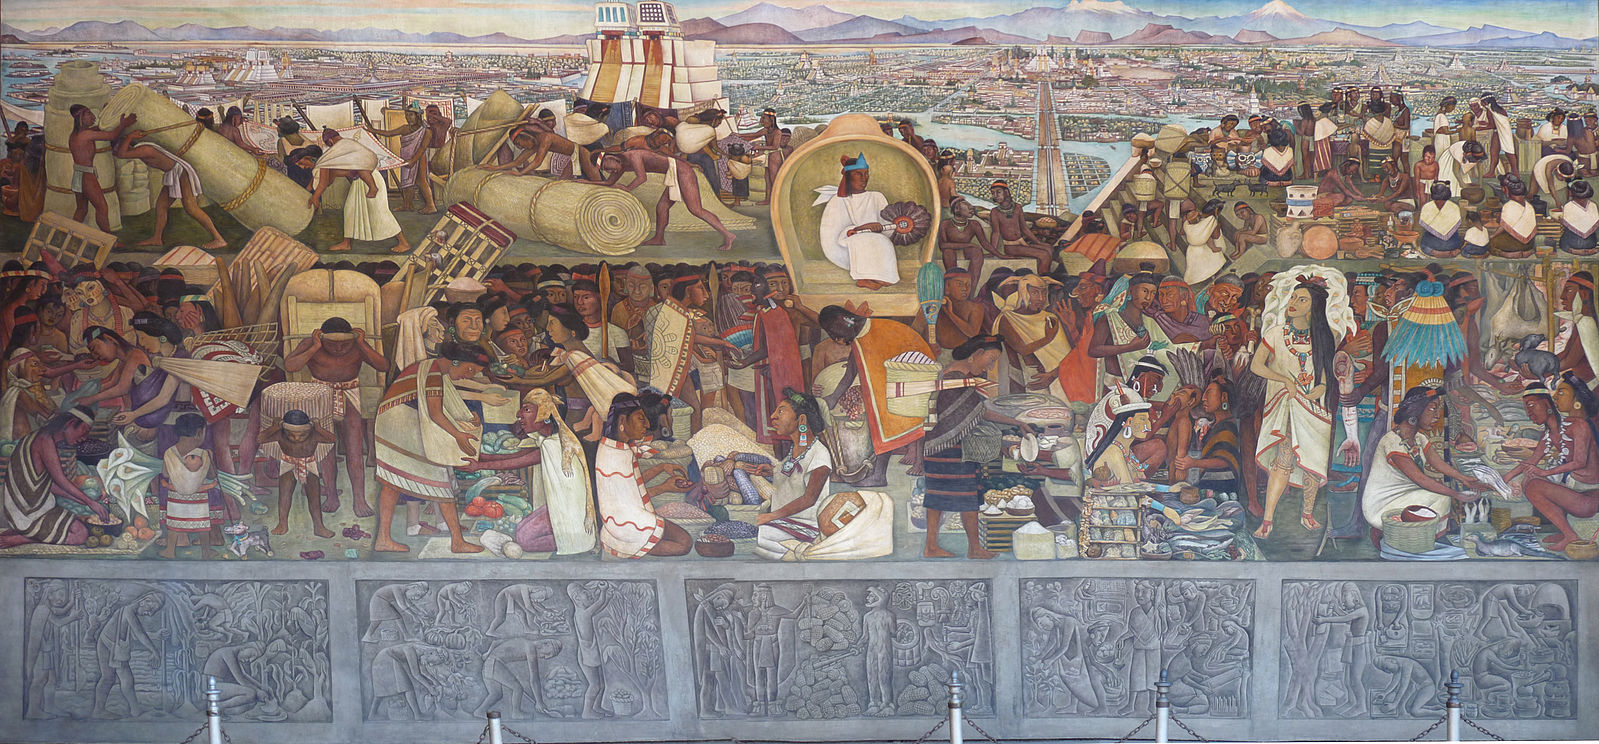 Tenochtitlan mural with people working in the foreground depicting the culture and jobs of the people